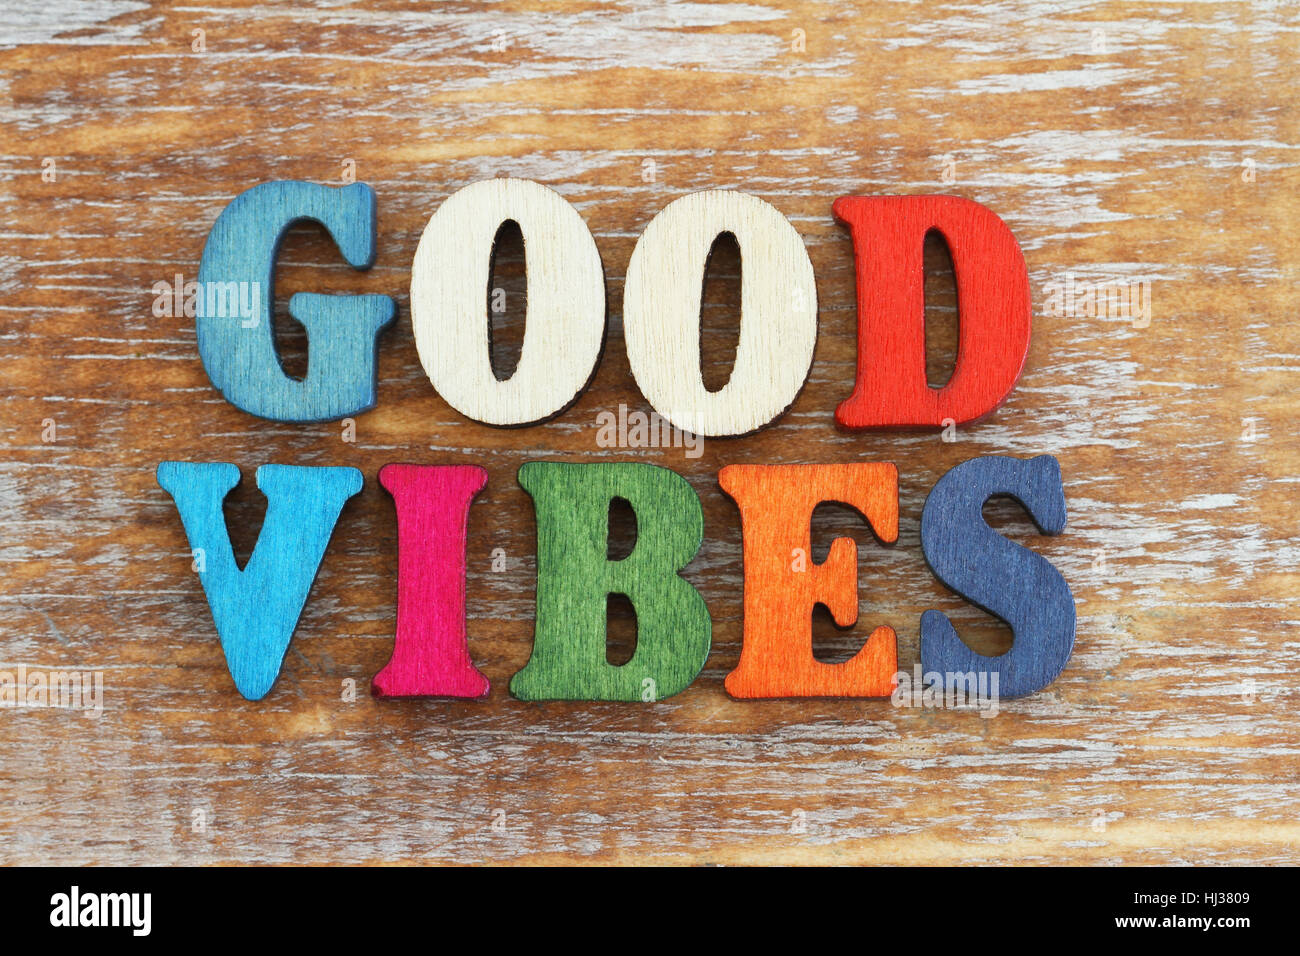 Good vibes written with colorful letters on rustic wooden surface Stock Photo